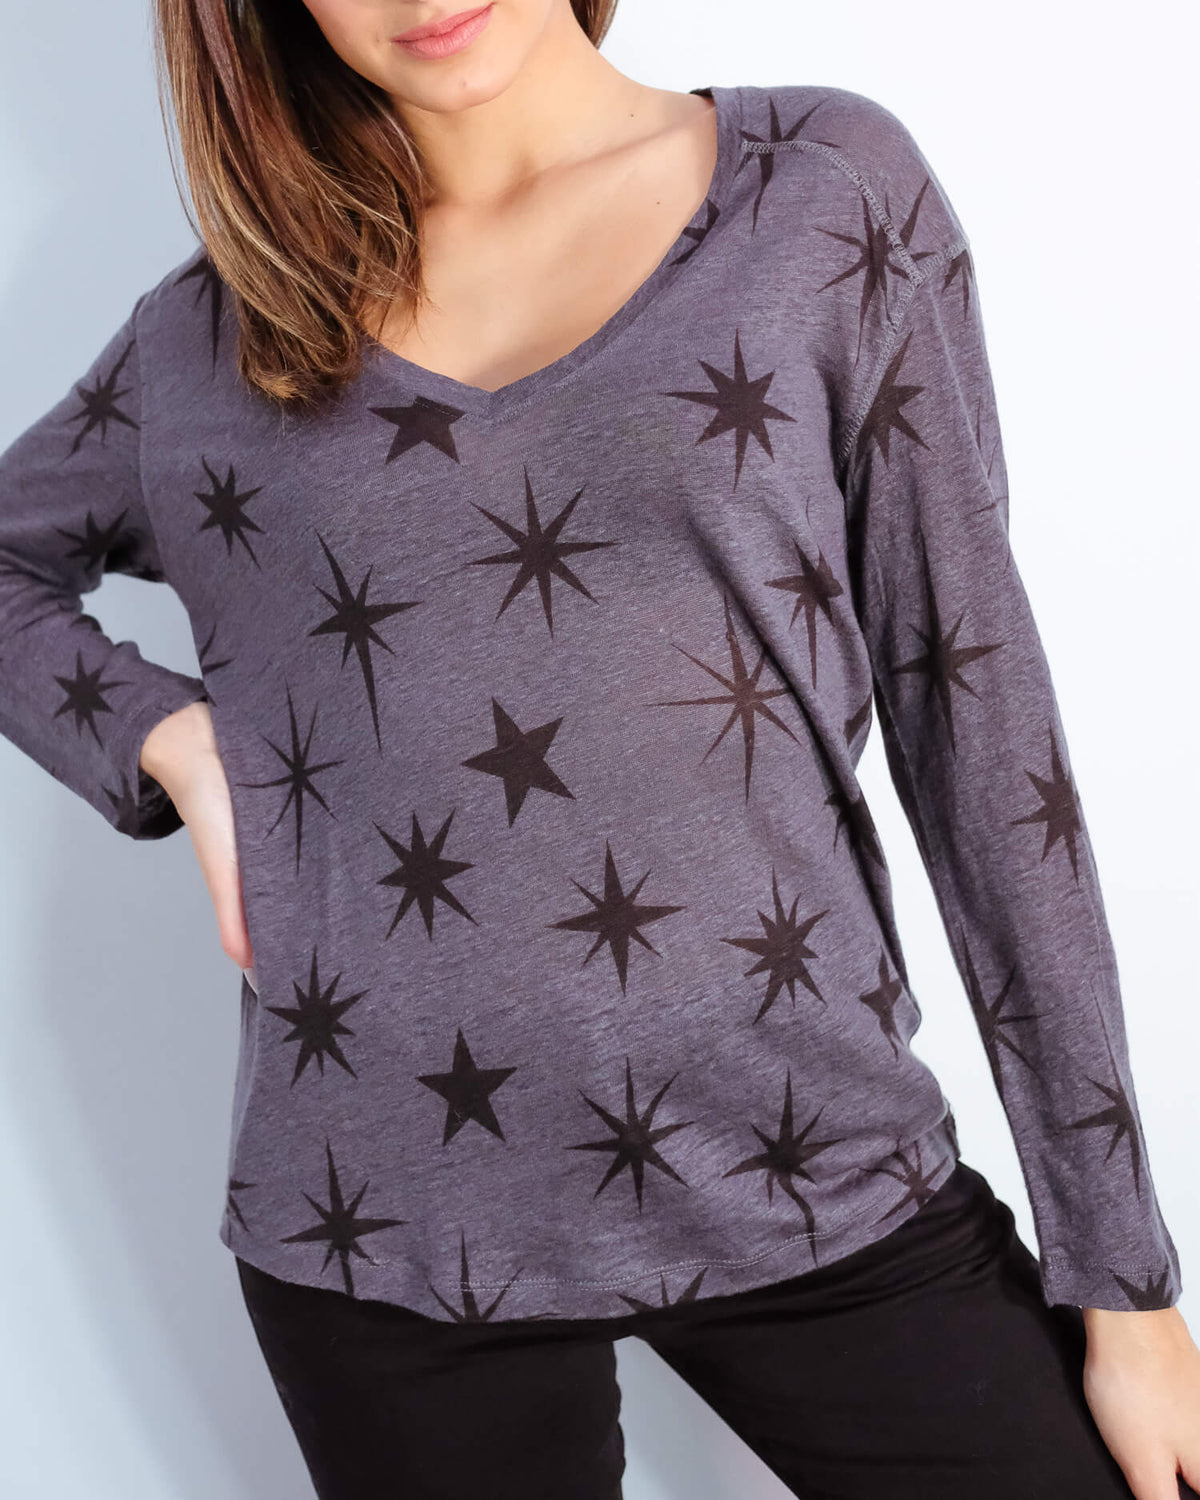 R Sami top in charcoal